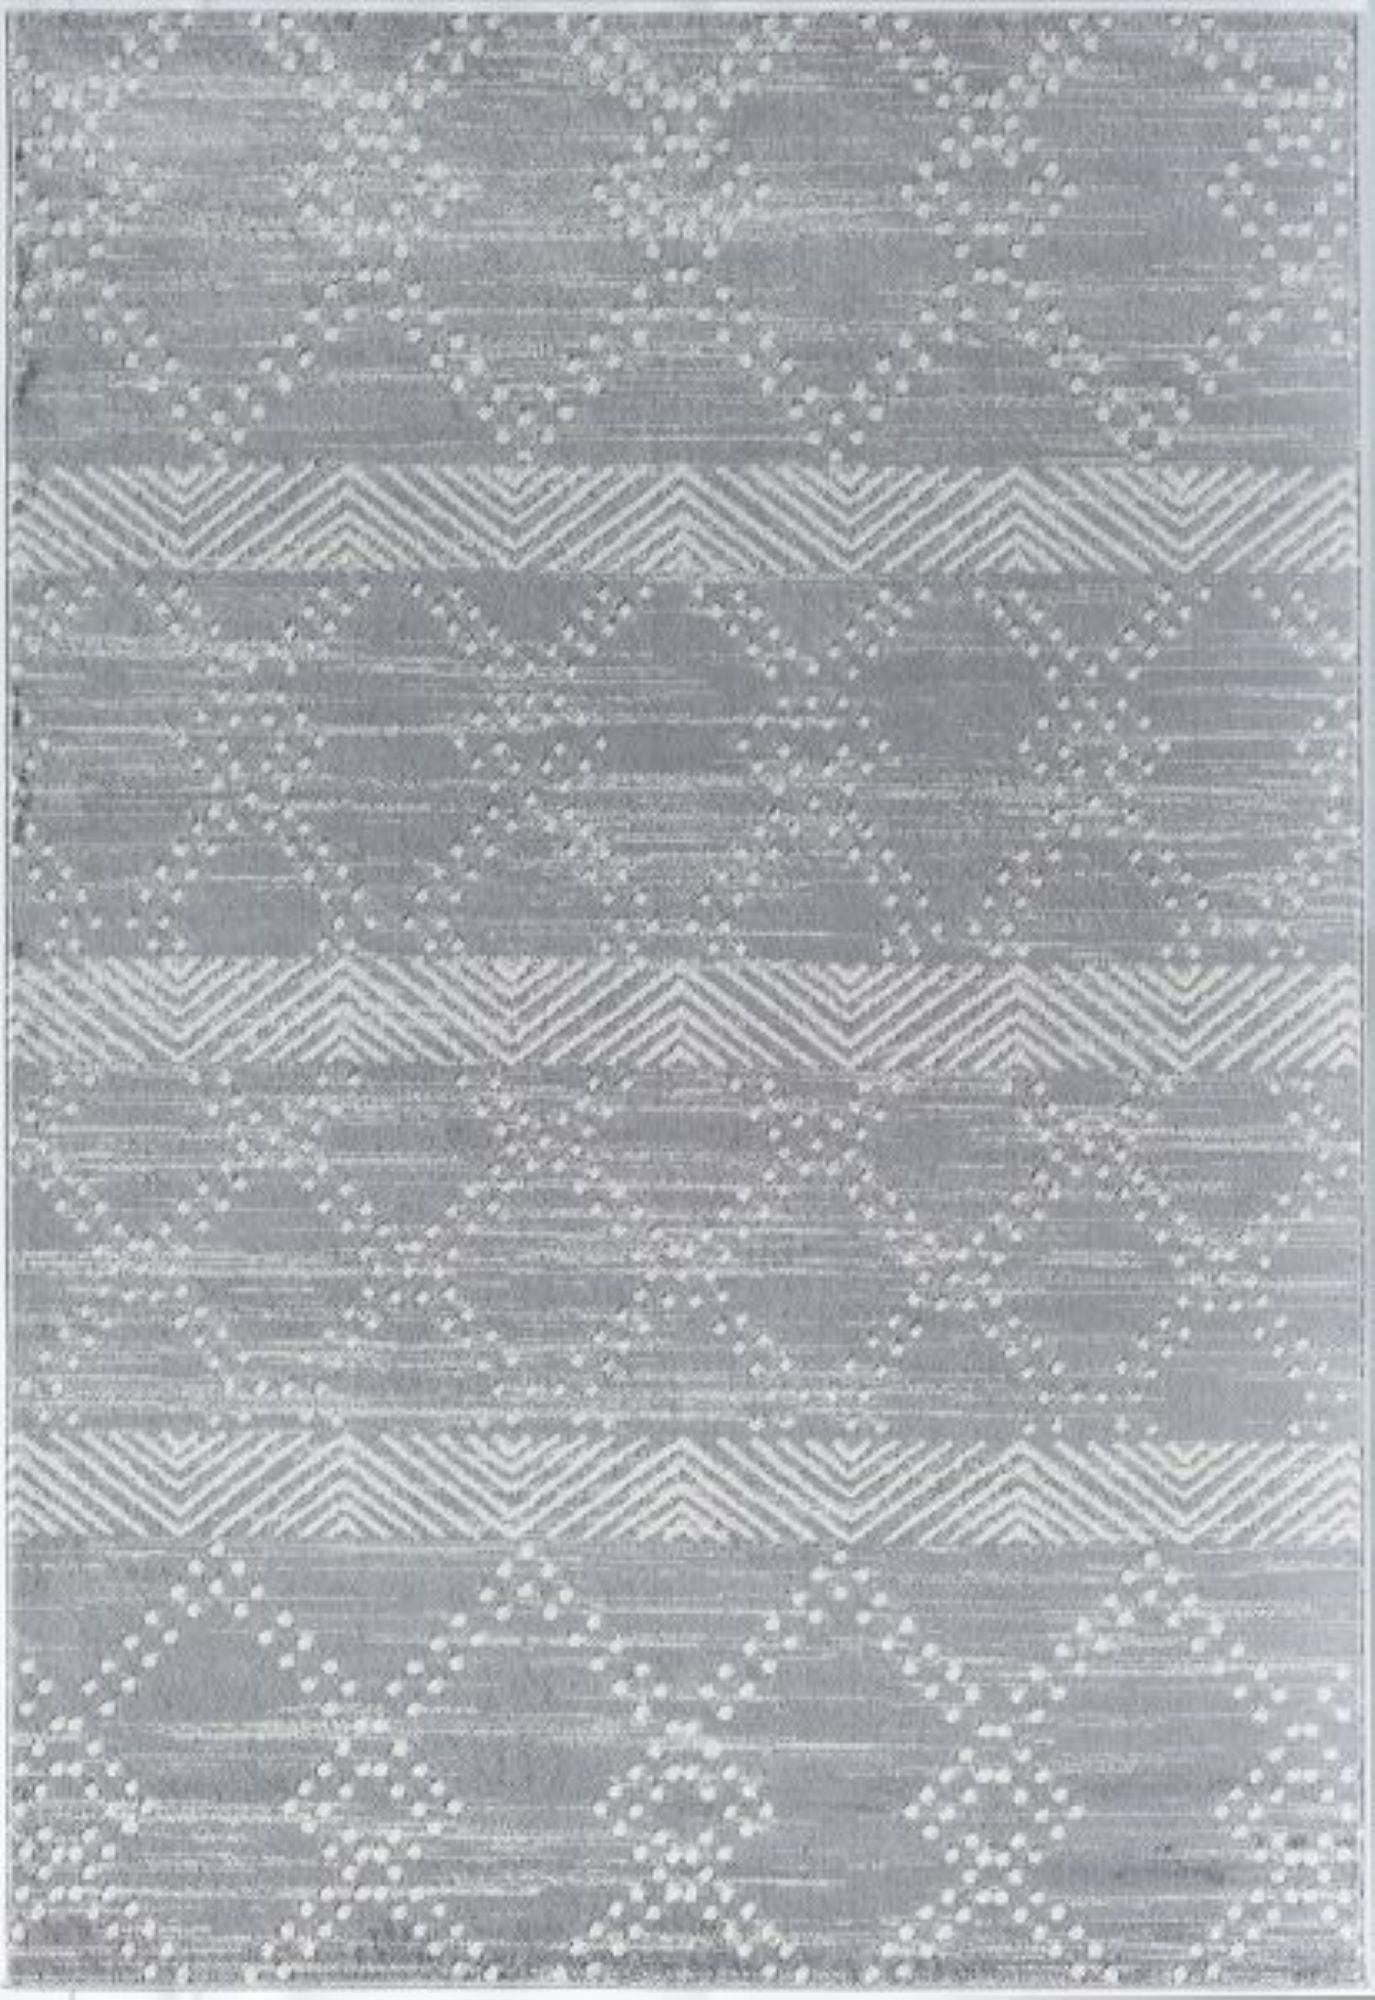 Little Seeds Serenity Vintage Rug Gray  8 x 10 - Gray